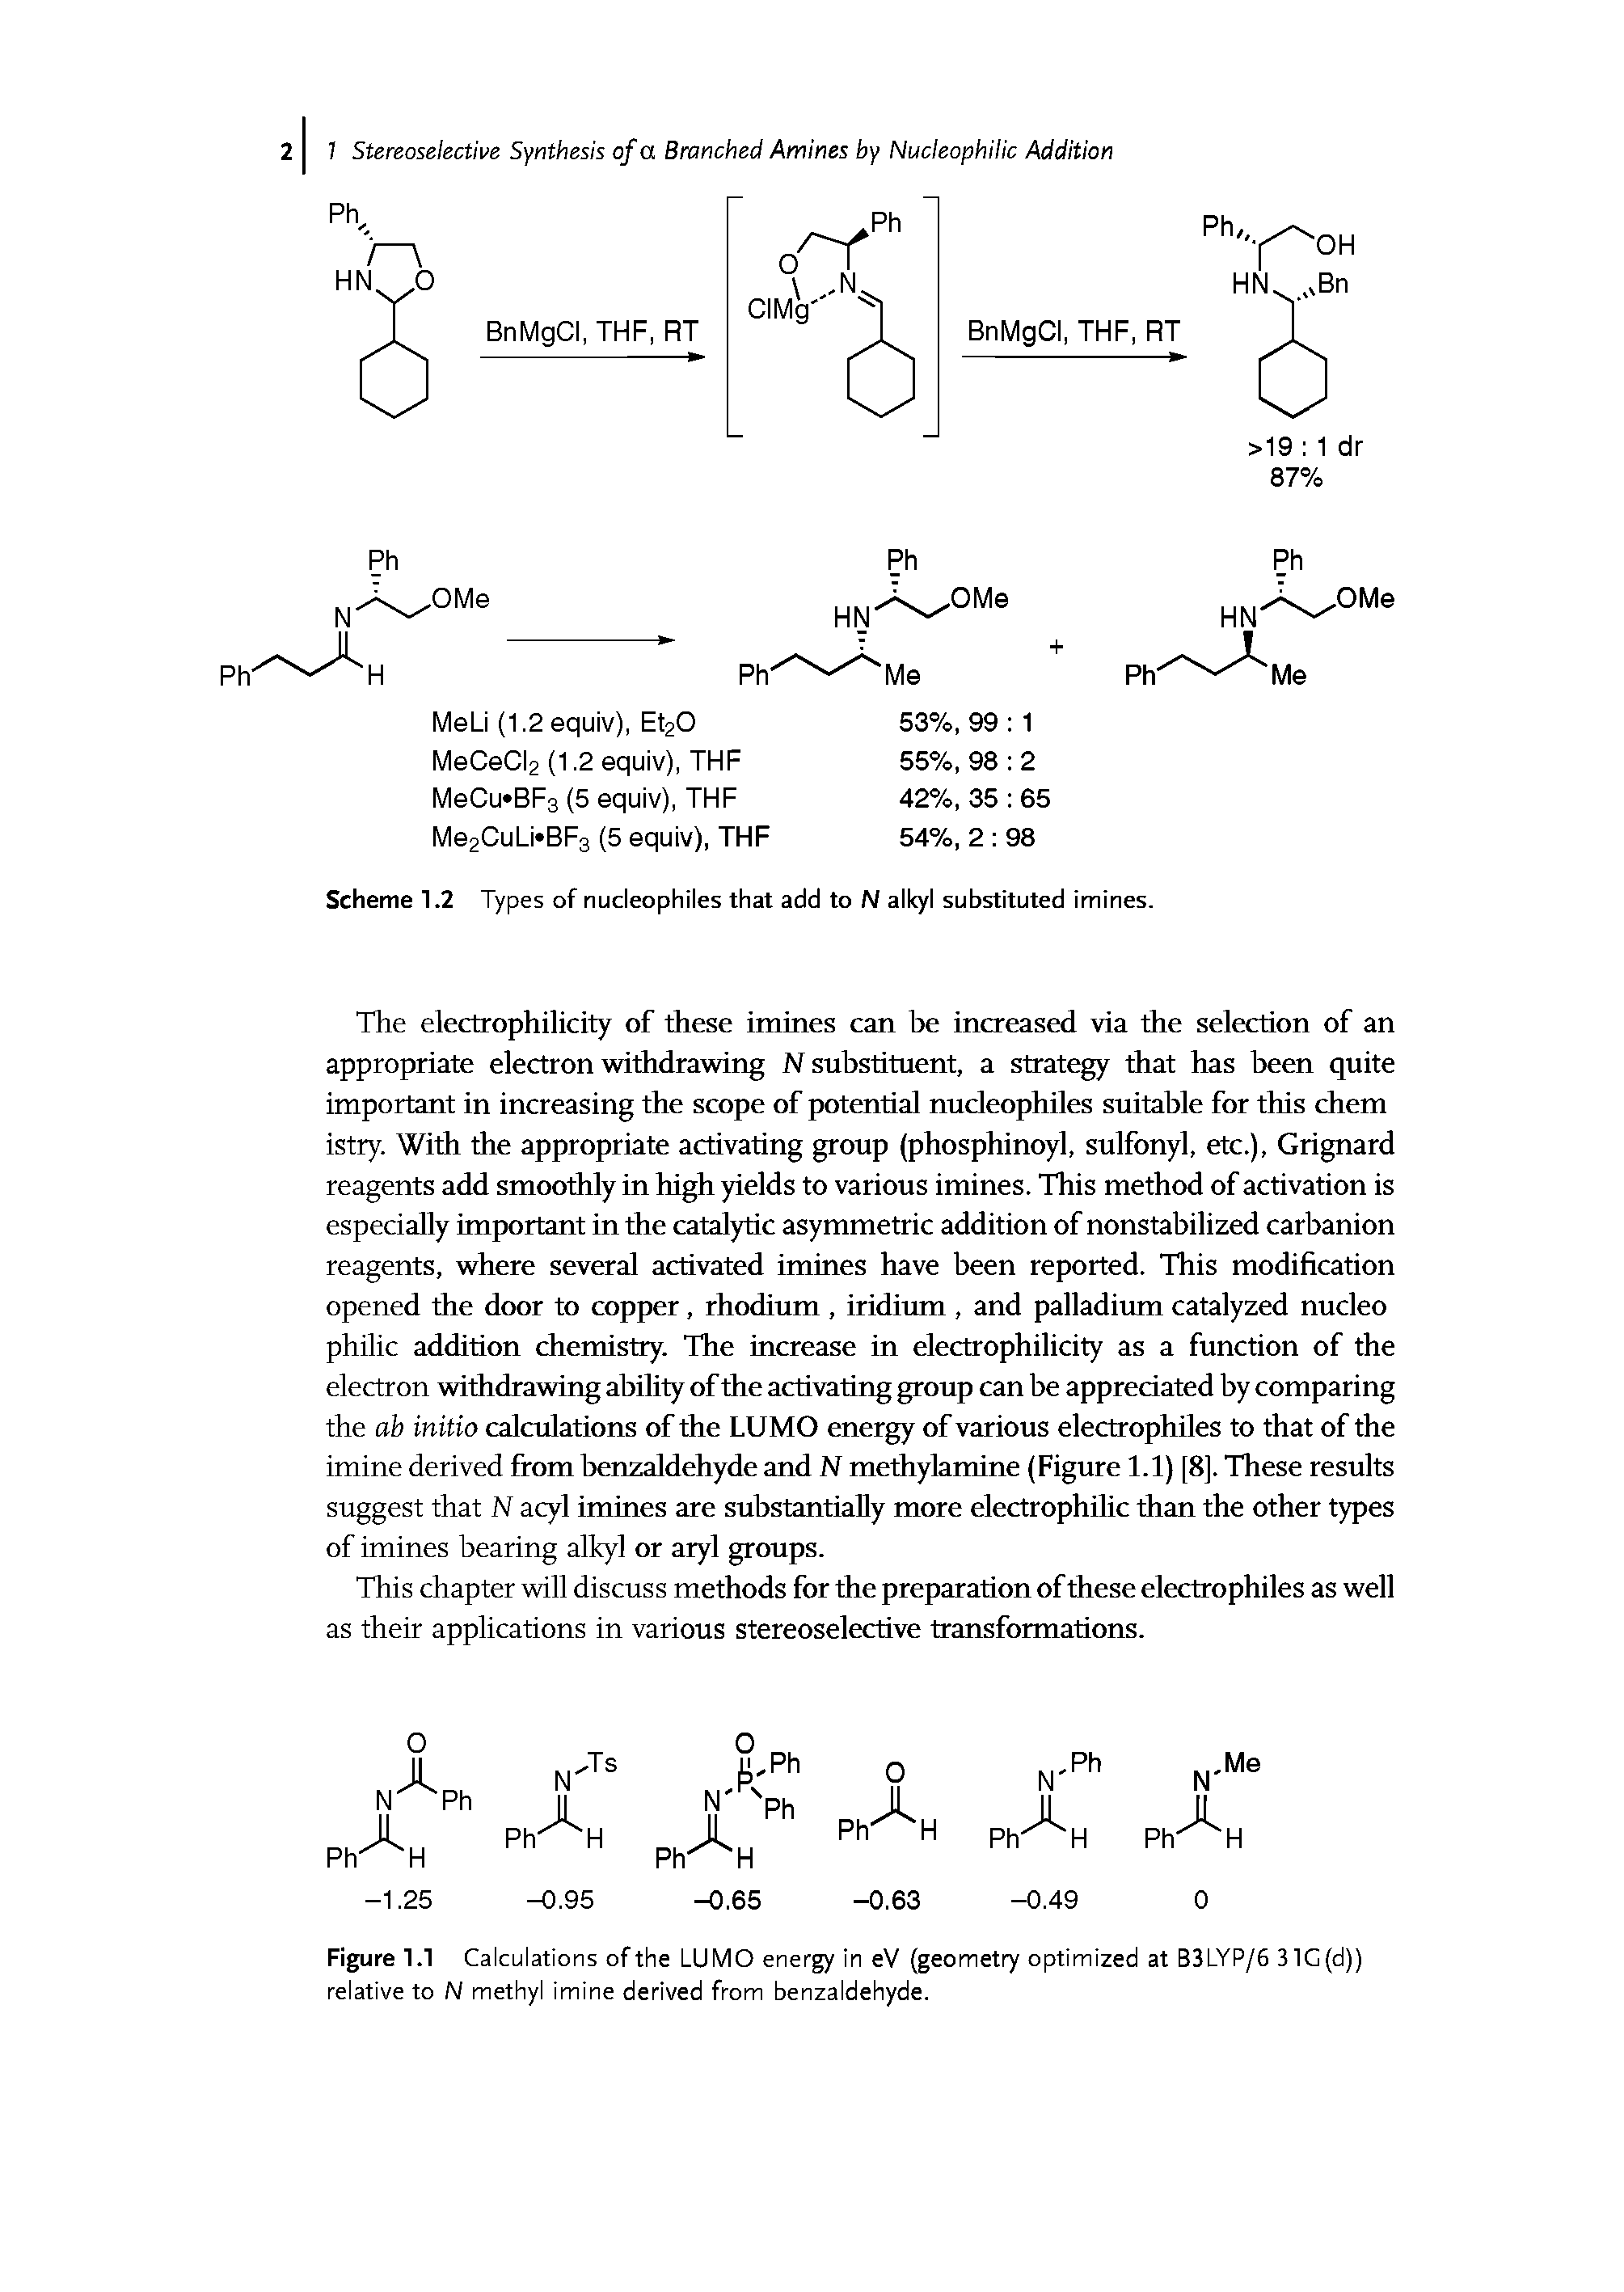 Figure 1.1 Calculations ofthe LUMO energy in eV (geometry optimized at B3LYP/6 31C(d)) relative to N methyl imine derived from benzaldehyde.